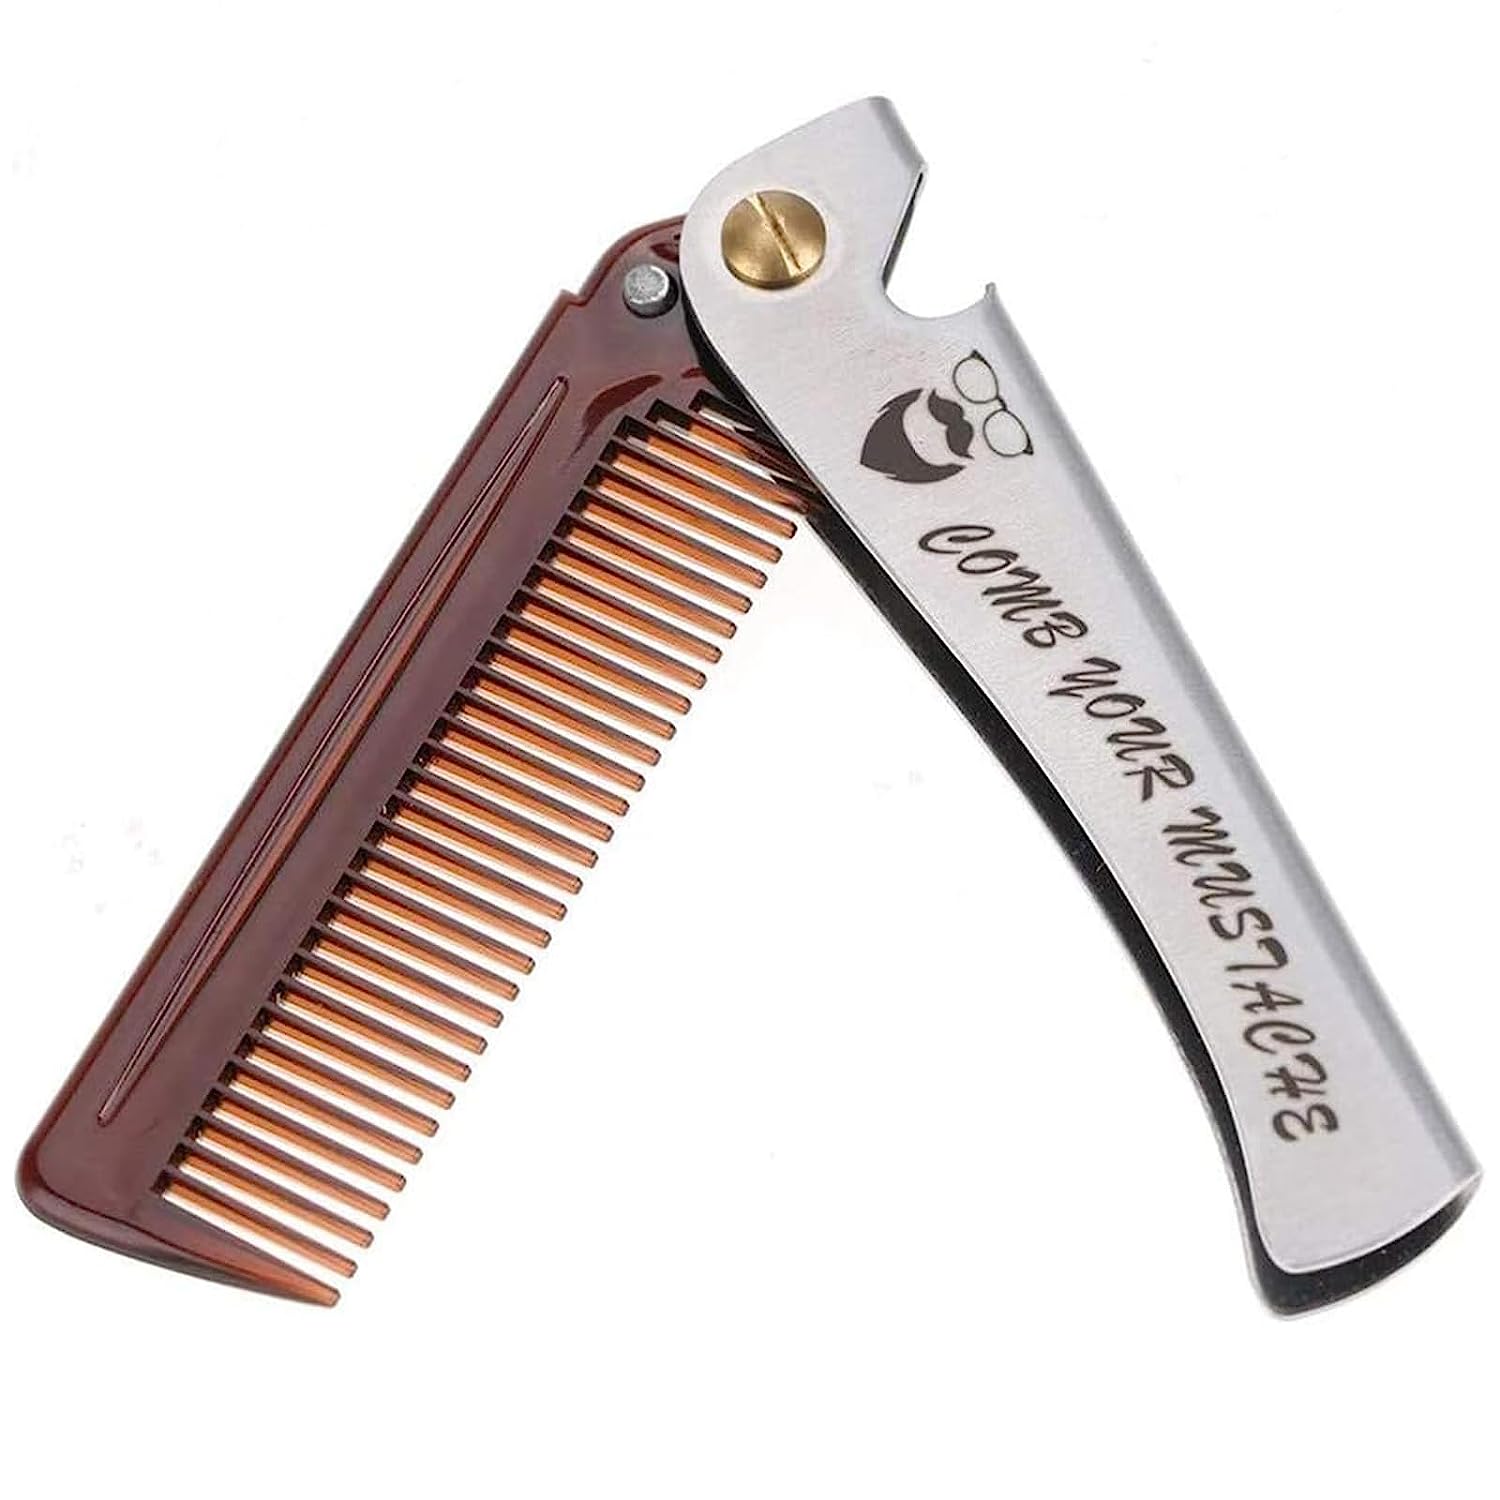 FOLDABLE BEART COMB WITH CORKSCREW COMB Men Professional Styling Comb Wide Tooth Comb Oil Head Comb Plastic Comb Hairstyle Comb Hairdresser Styling Tool